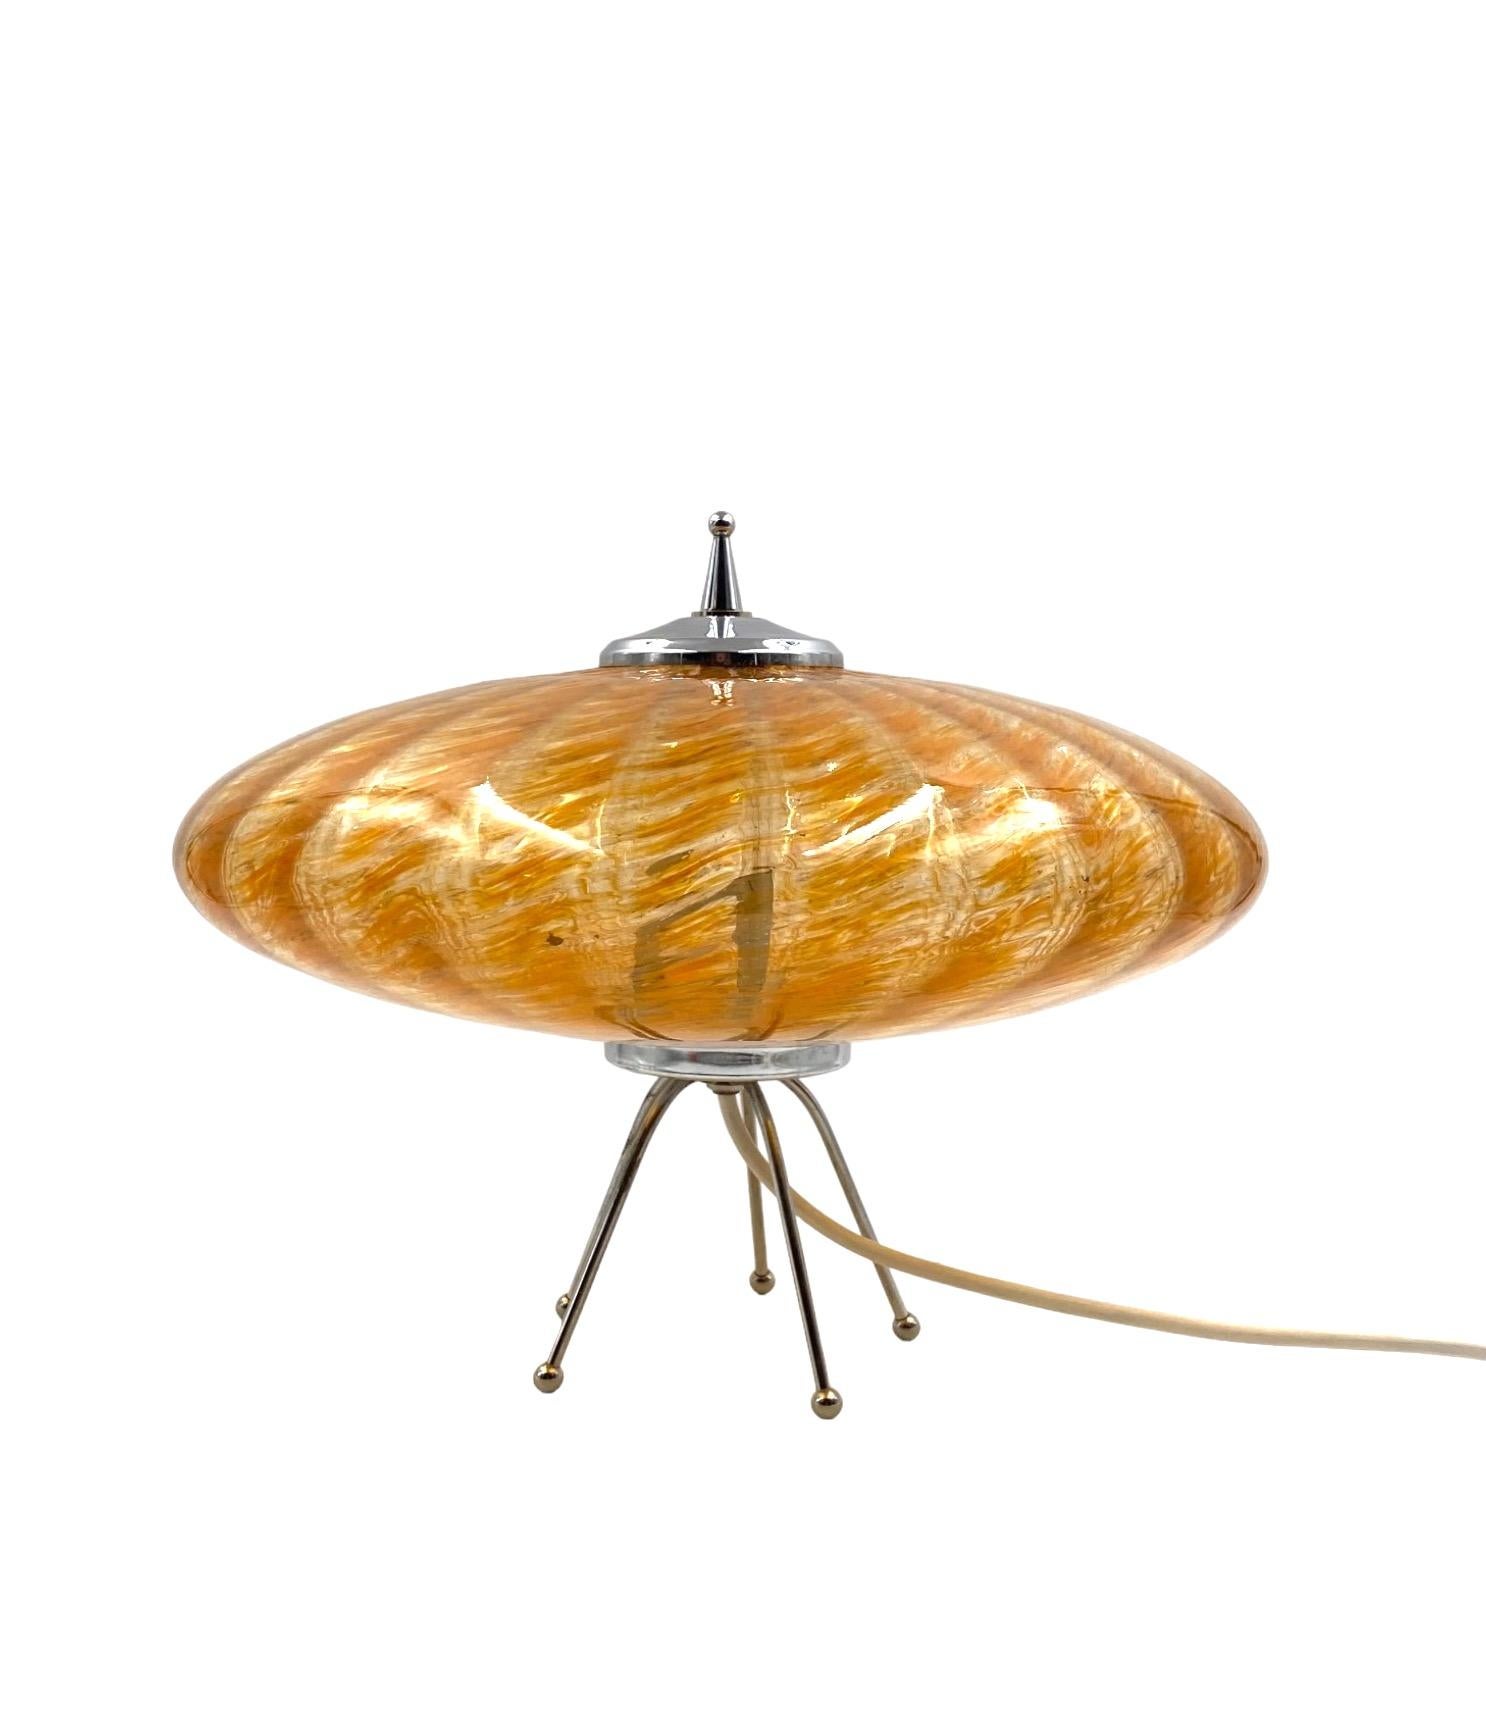 Murano orange glass flying saucer Ufo table lamp, Murano Italy 1970s For Sale 2